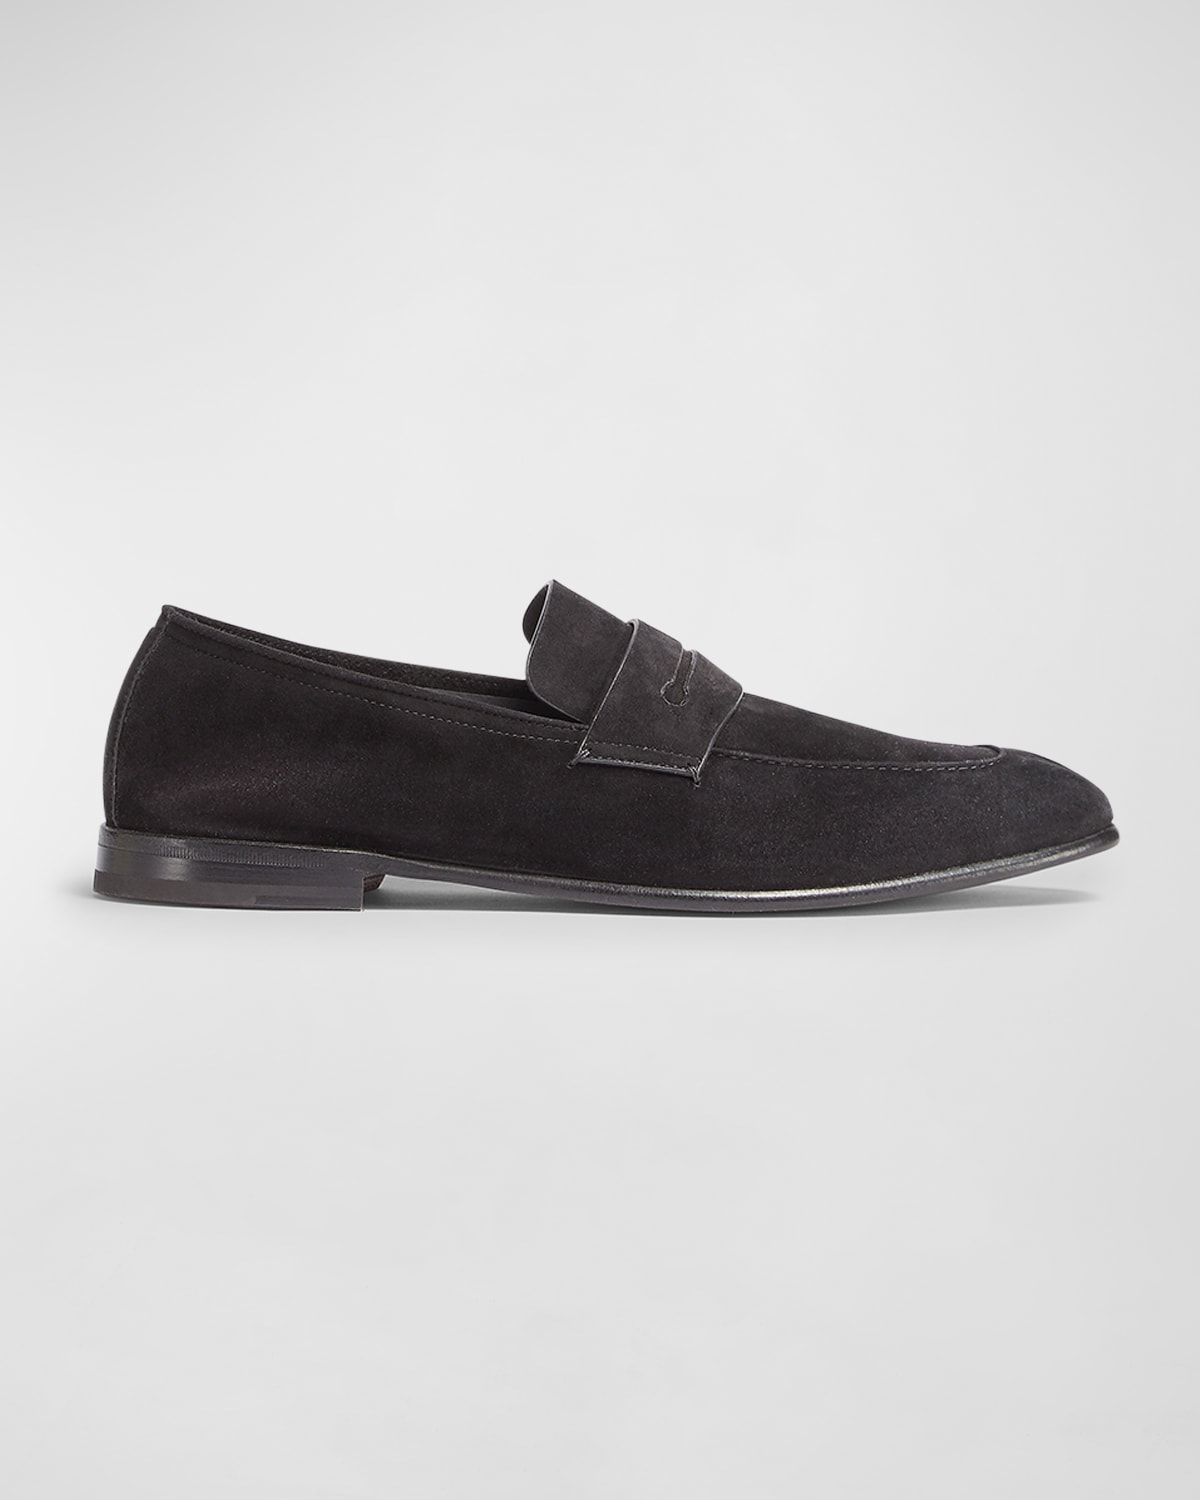 Men's Suede Penny Loafers